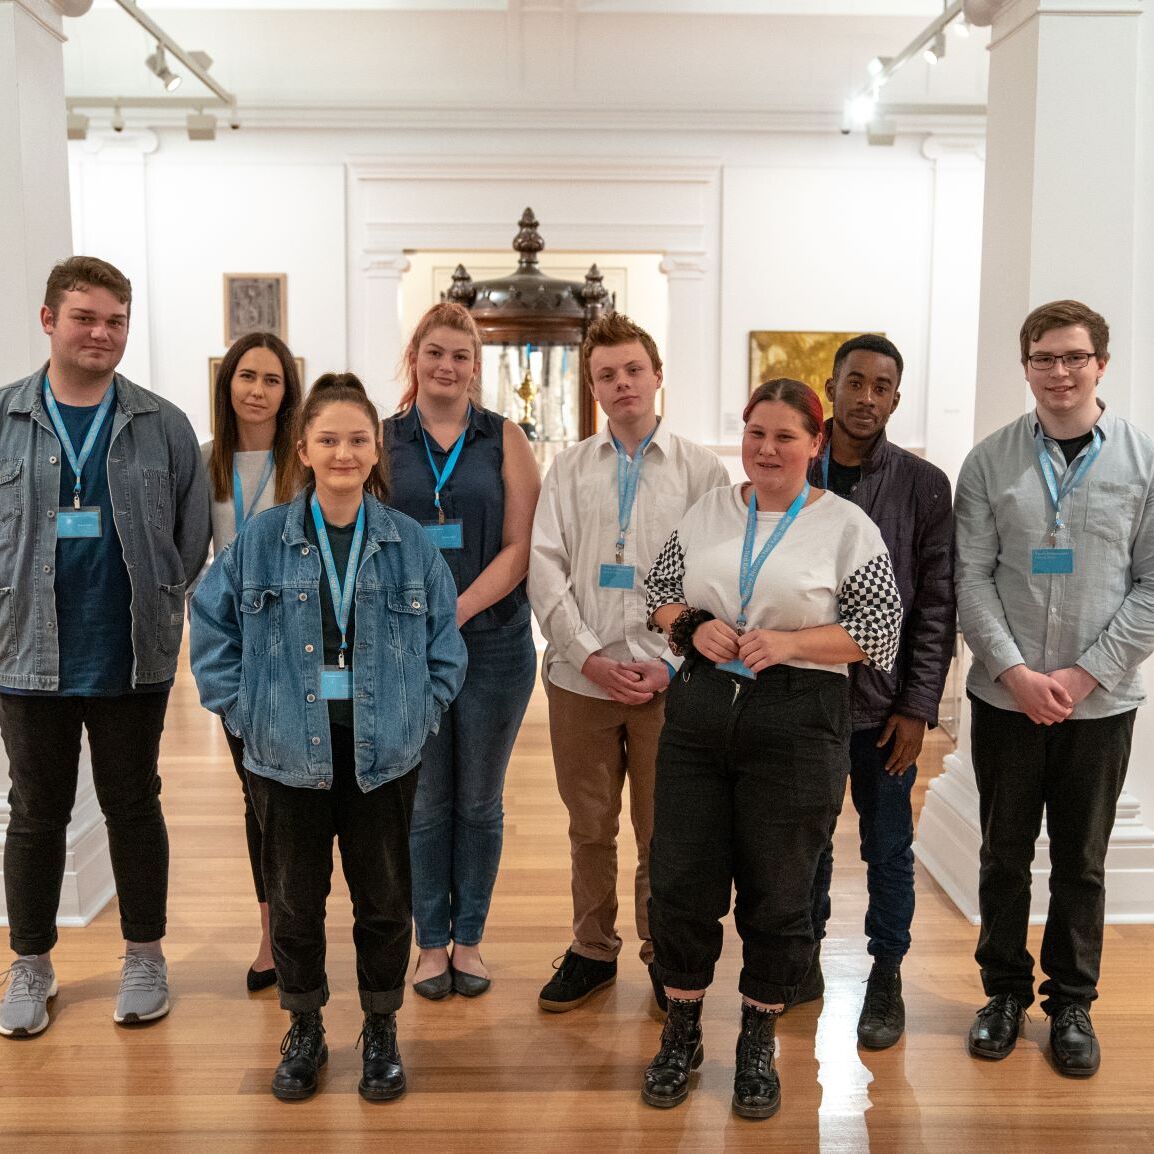 SESSION 5 - Participants in the Geelong Gallery Youth Ambassador Program, 2019. Photo Levi Ingram